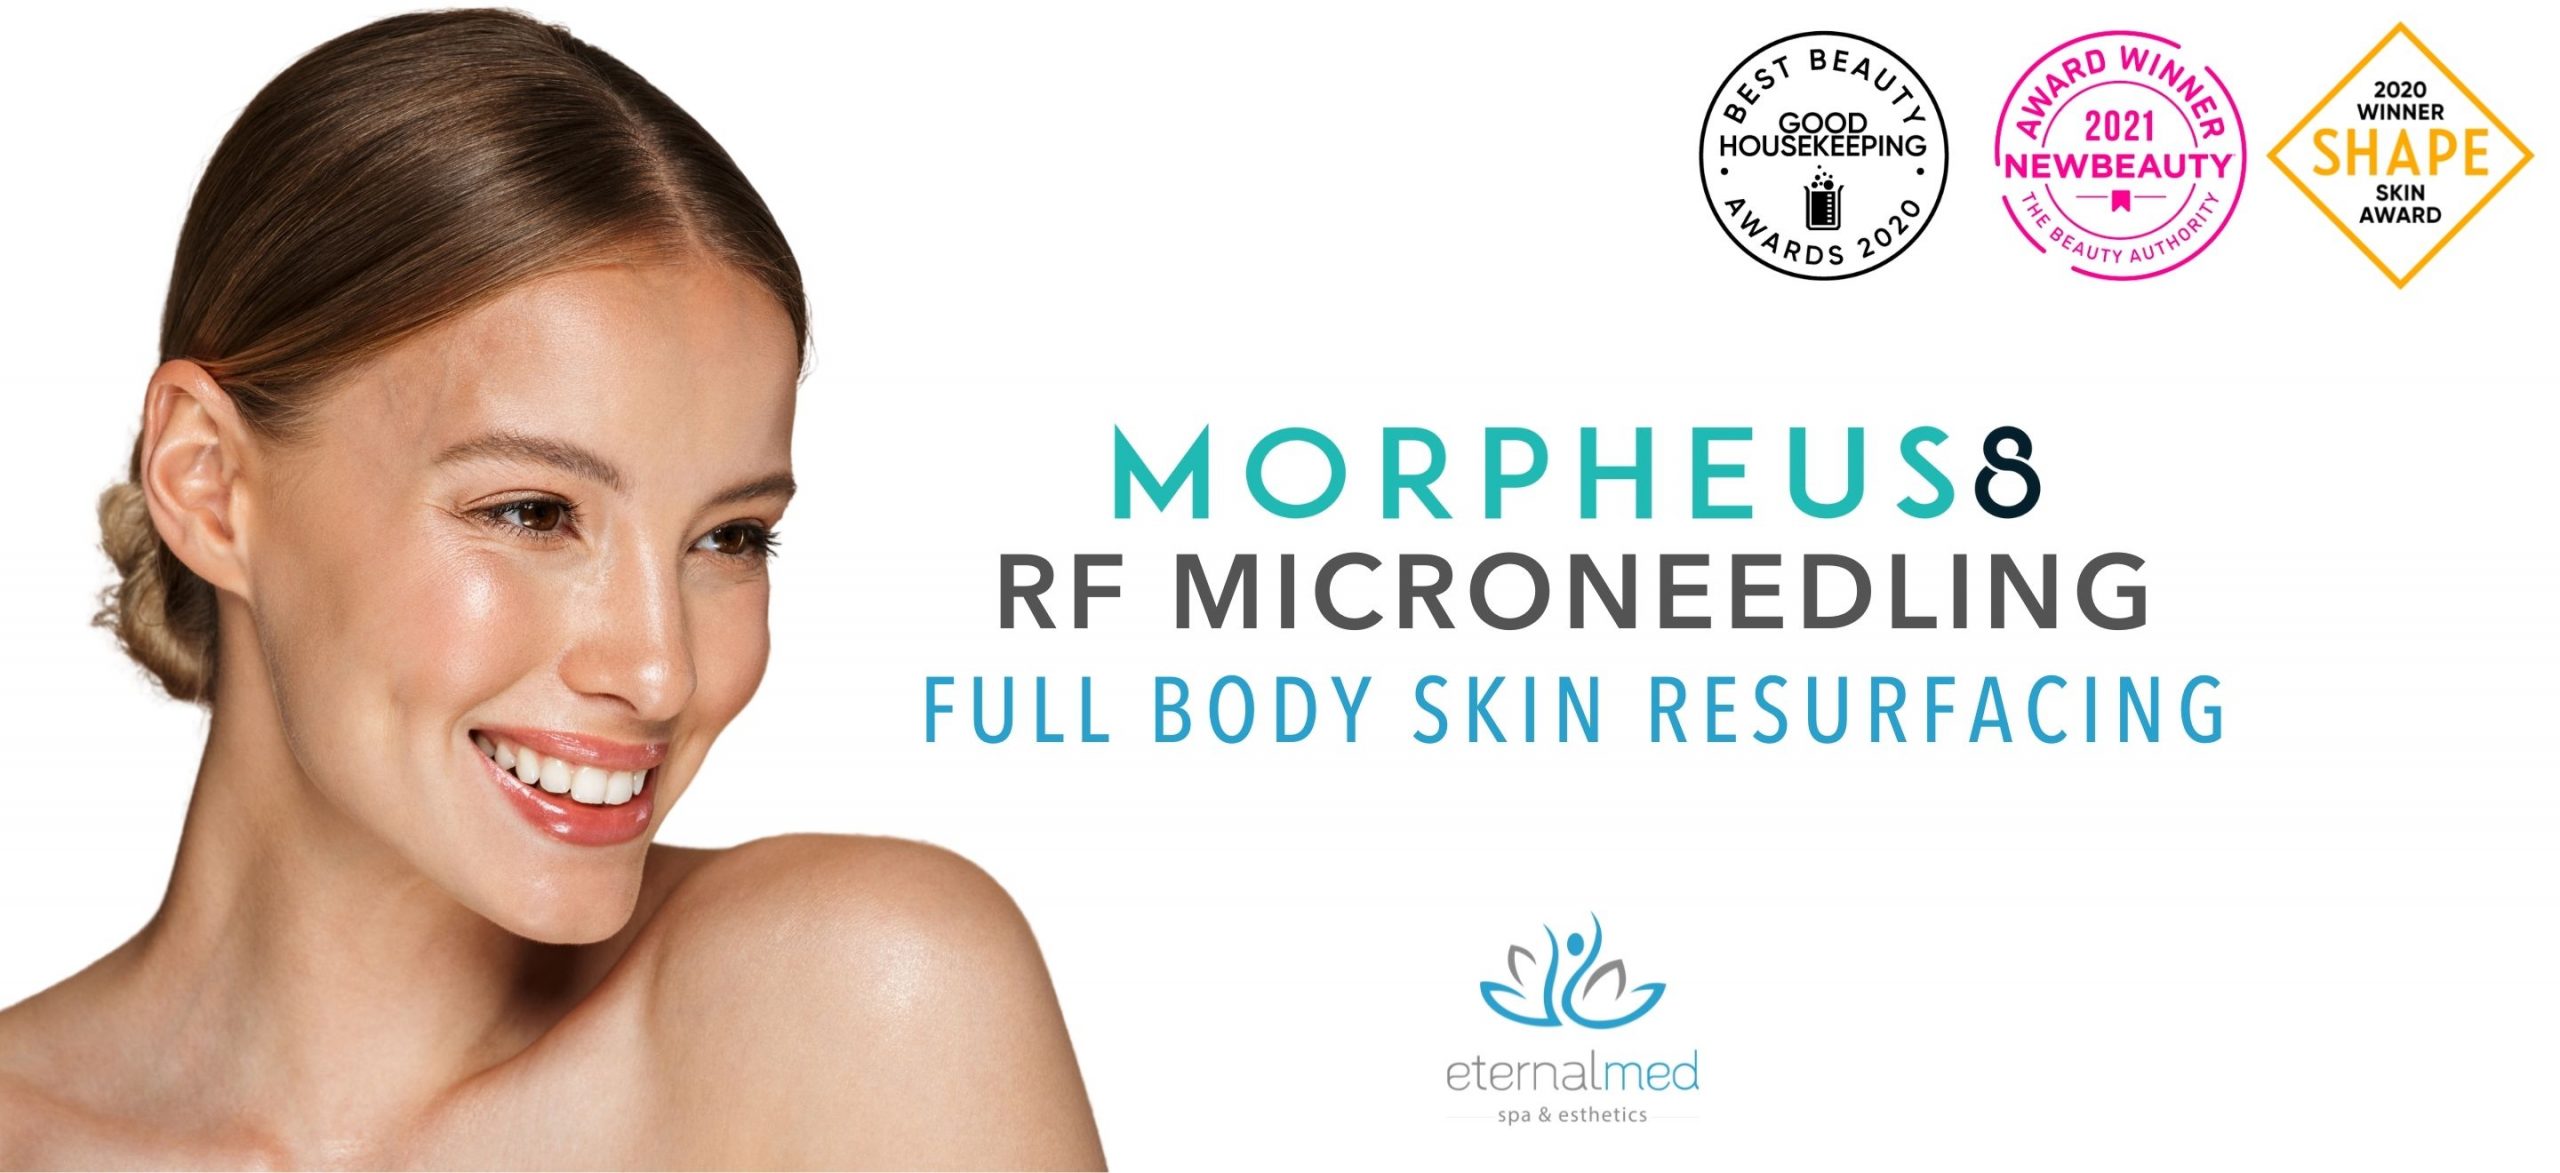 woman with clear face promoting RF microneedling with Morpheus8